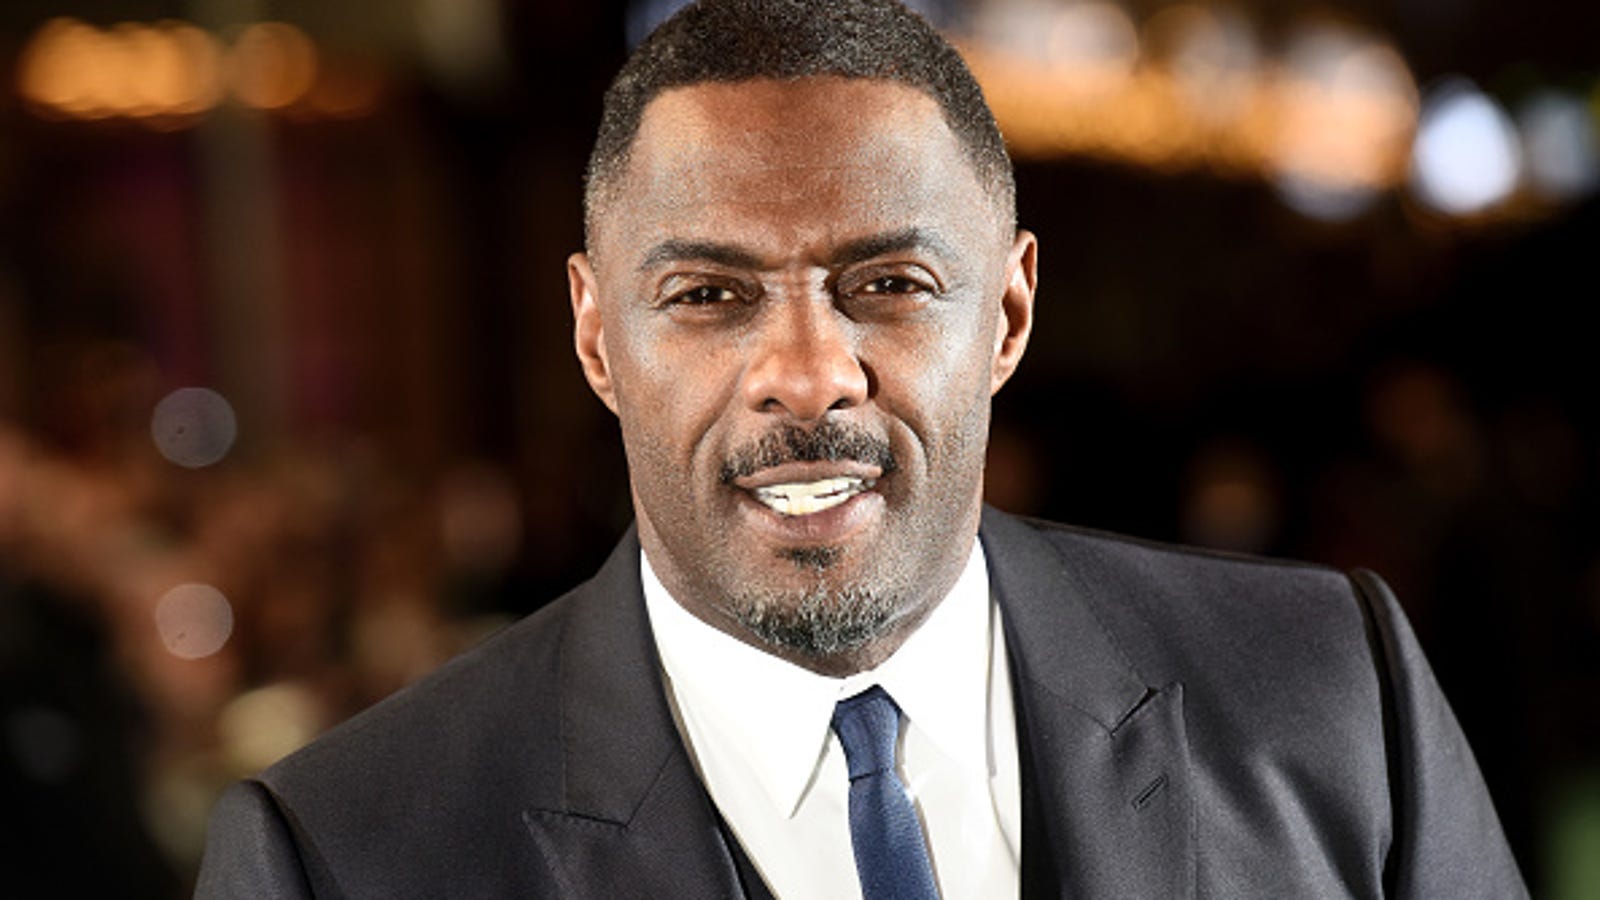 Idris Elba Casted In 'Fast & Furious' Spinoff As A Villain